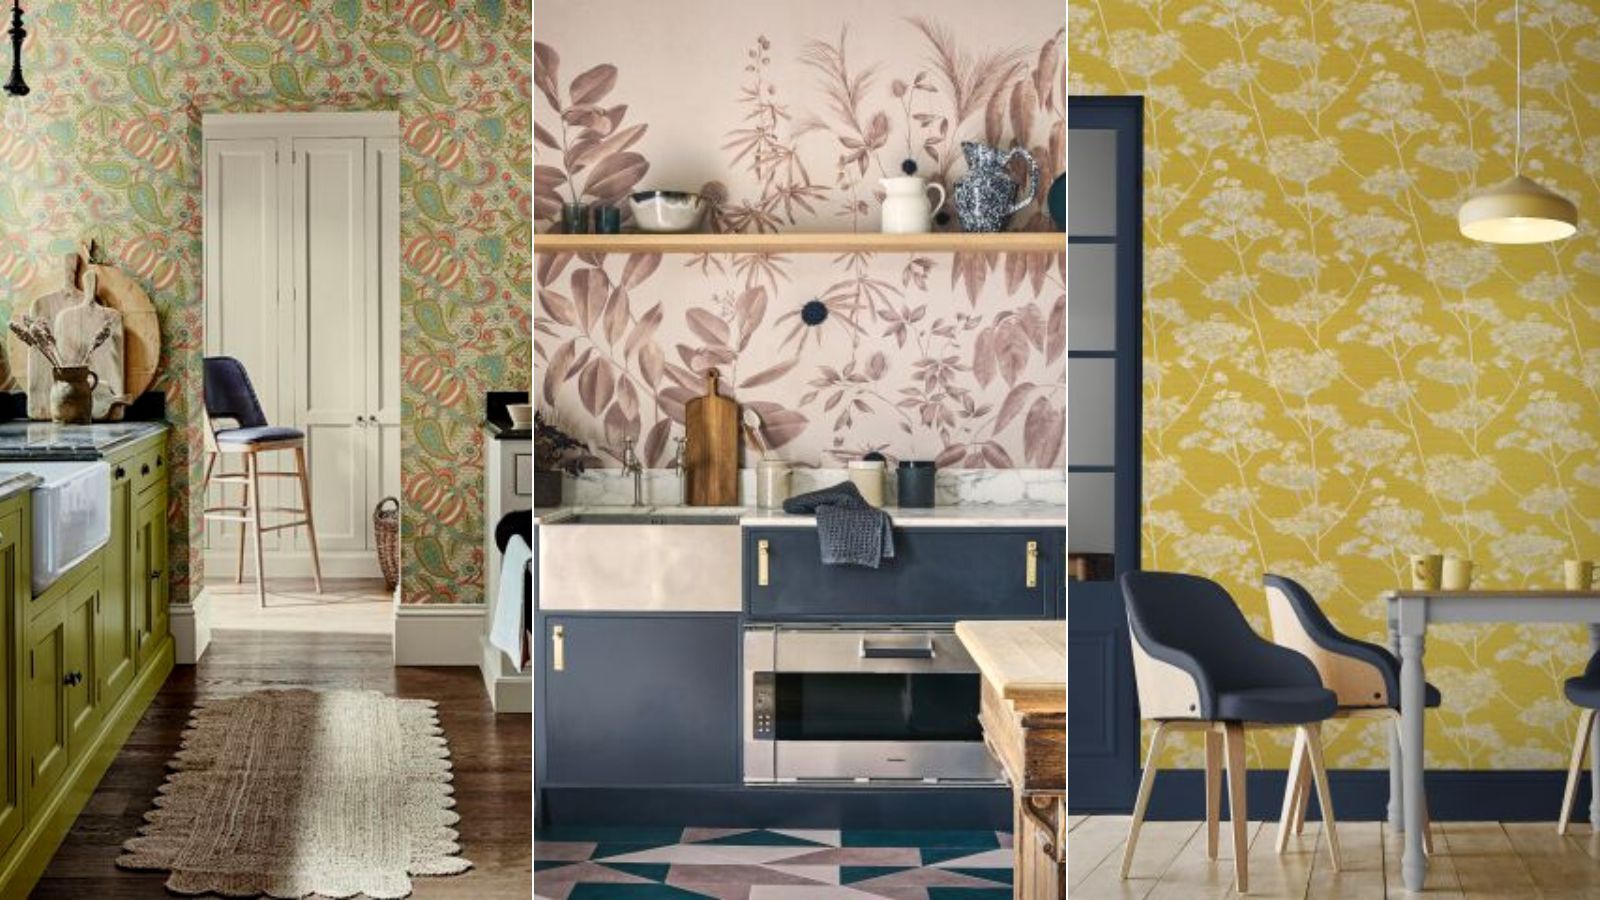 Kitchen wall decor ideas – 21 stylish looks with paint, tiles and wallpaper